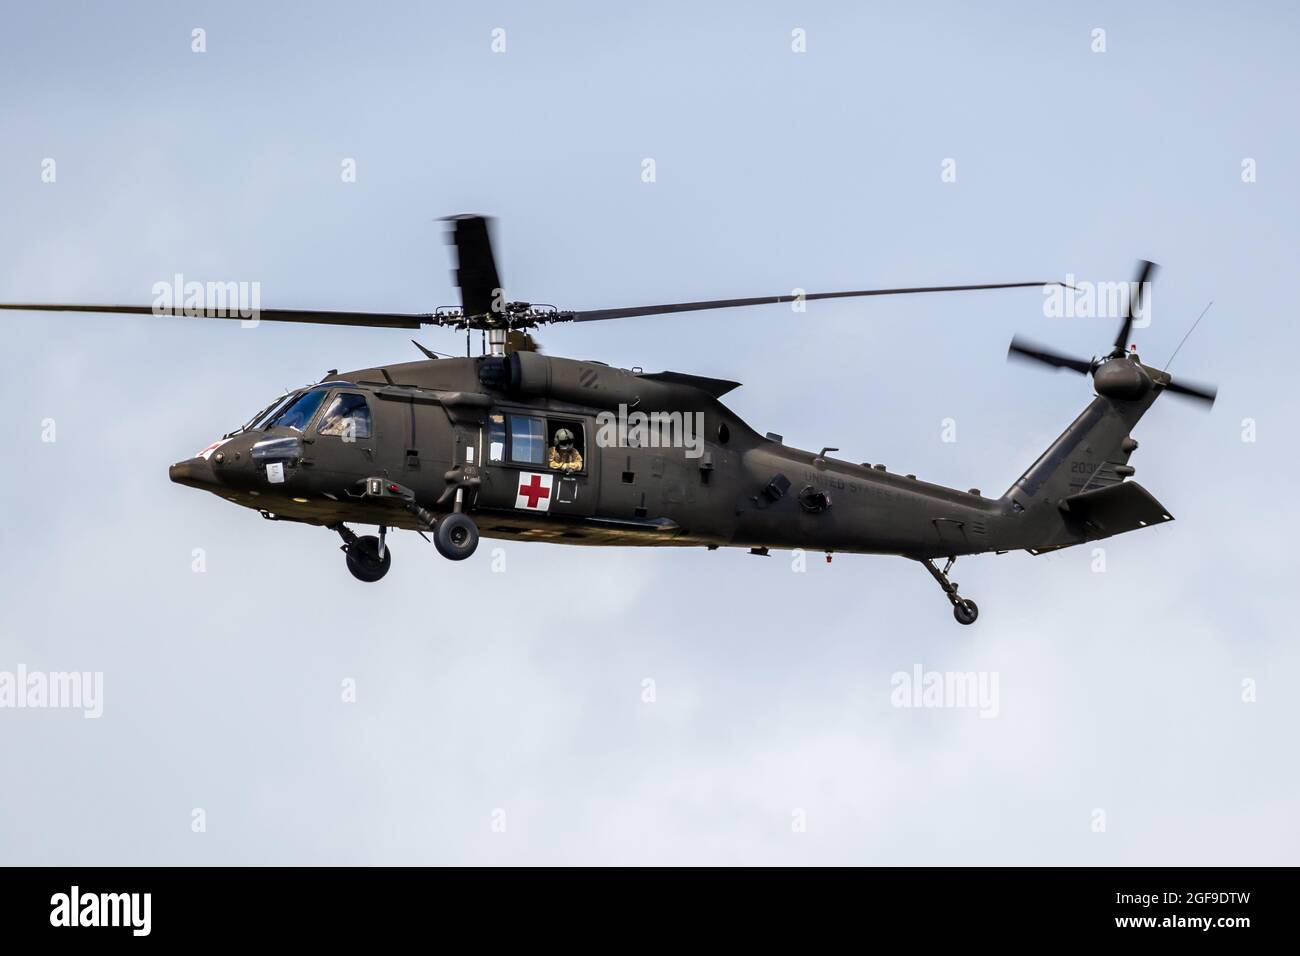 United States Army Sikorsky UH-60M Blackhawk medevac helicopter in flight. The Netherlands - July 6, 2020 Stock Photo